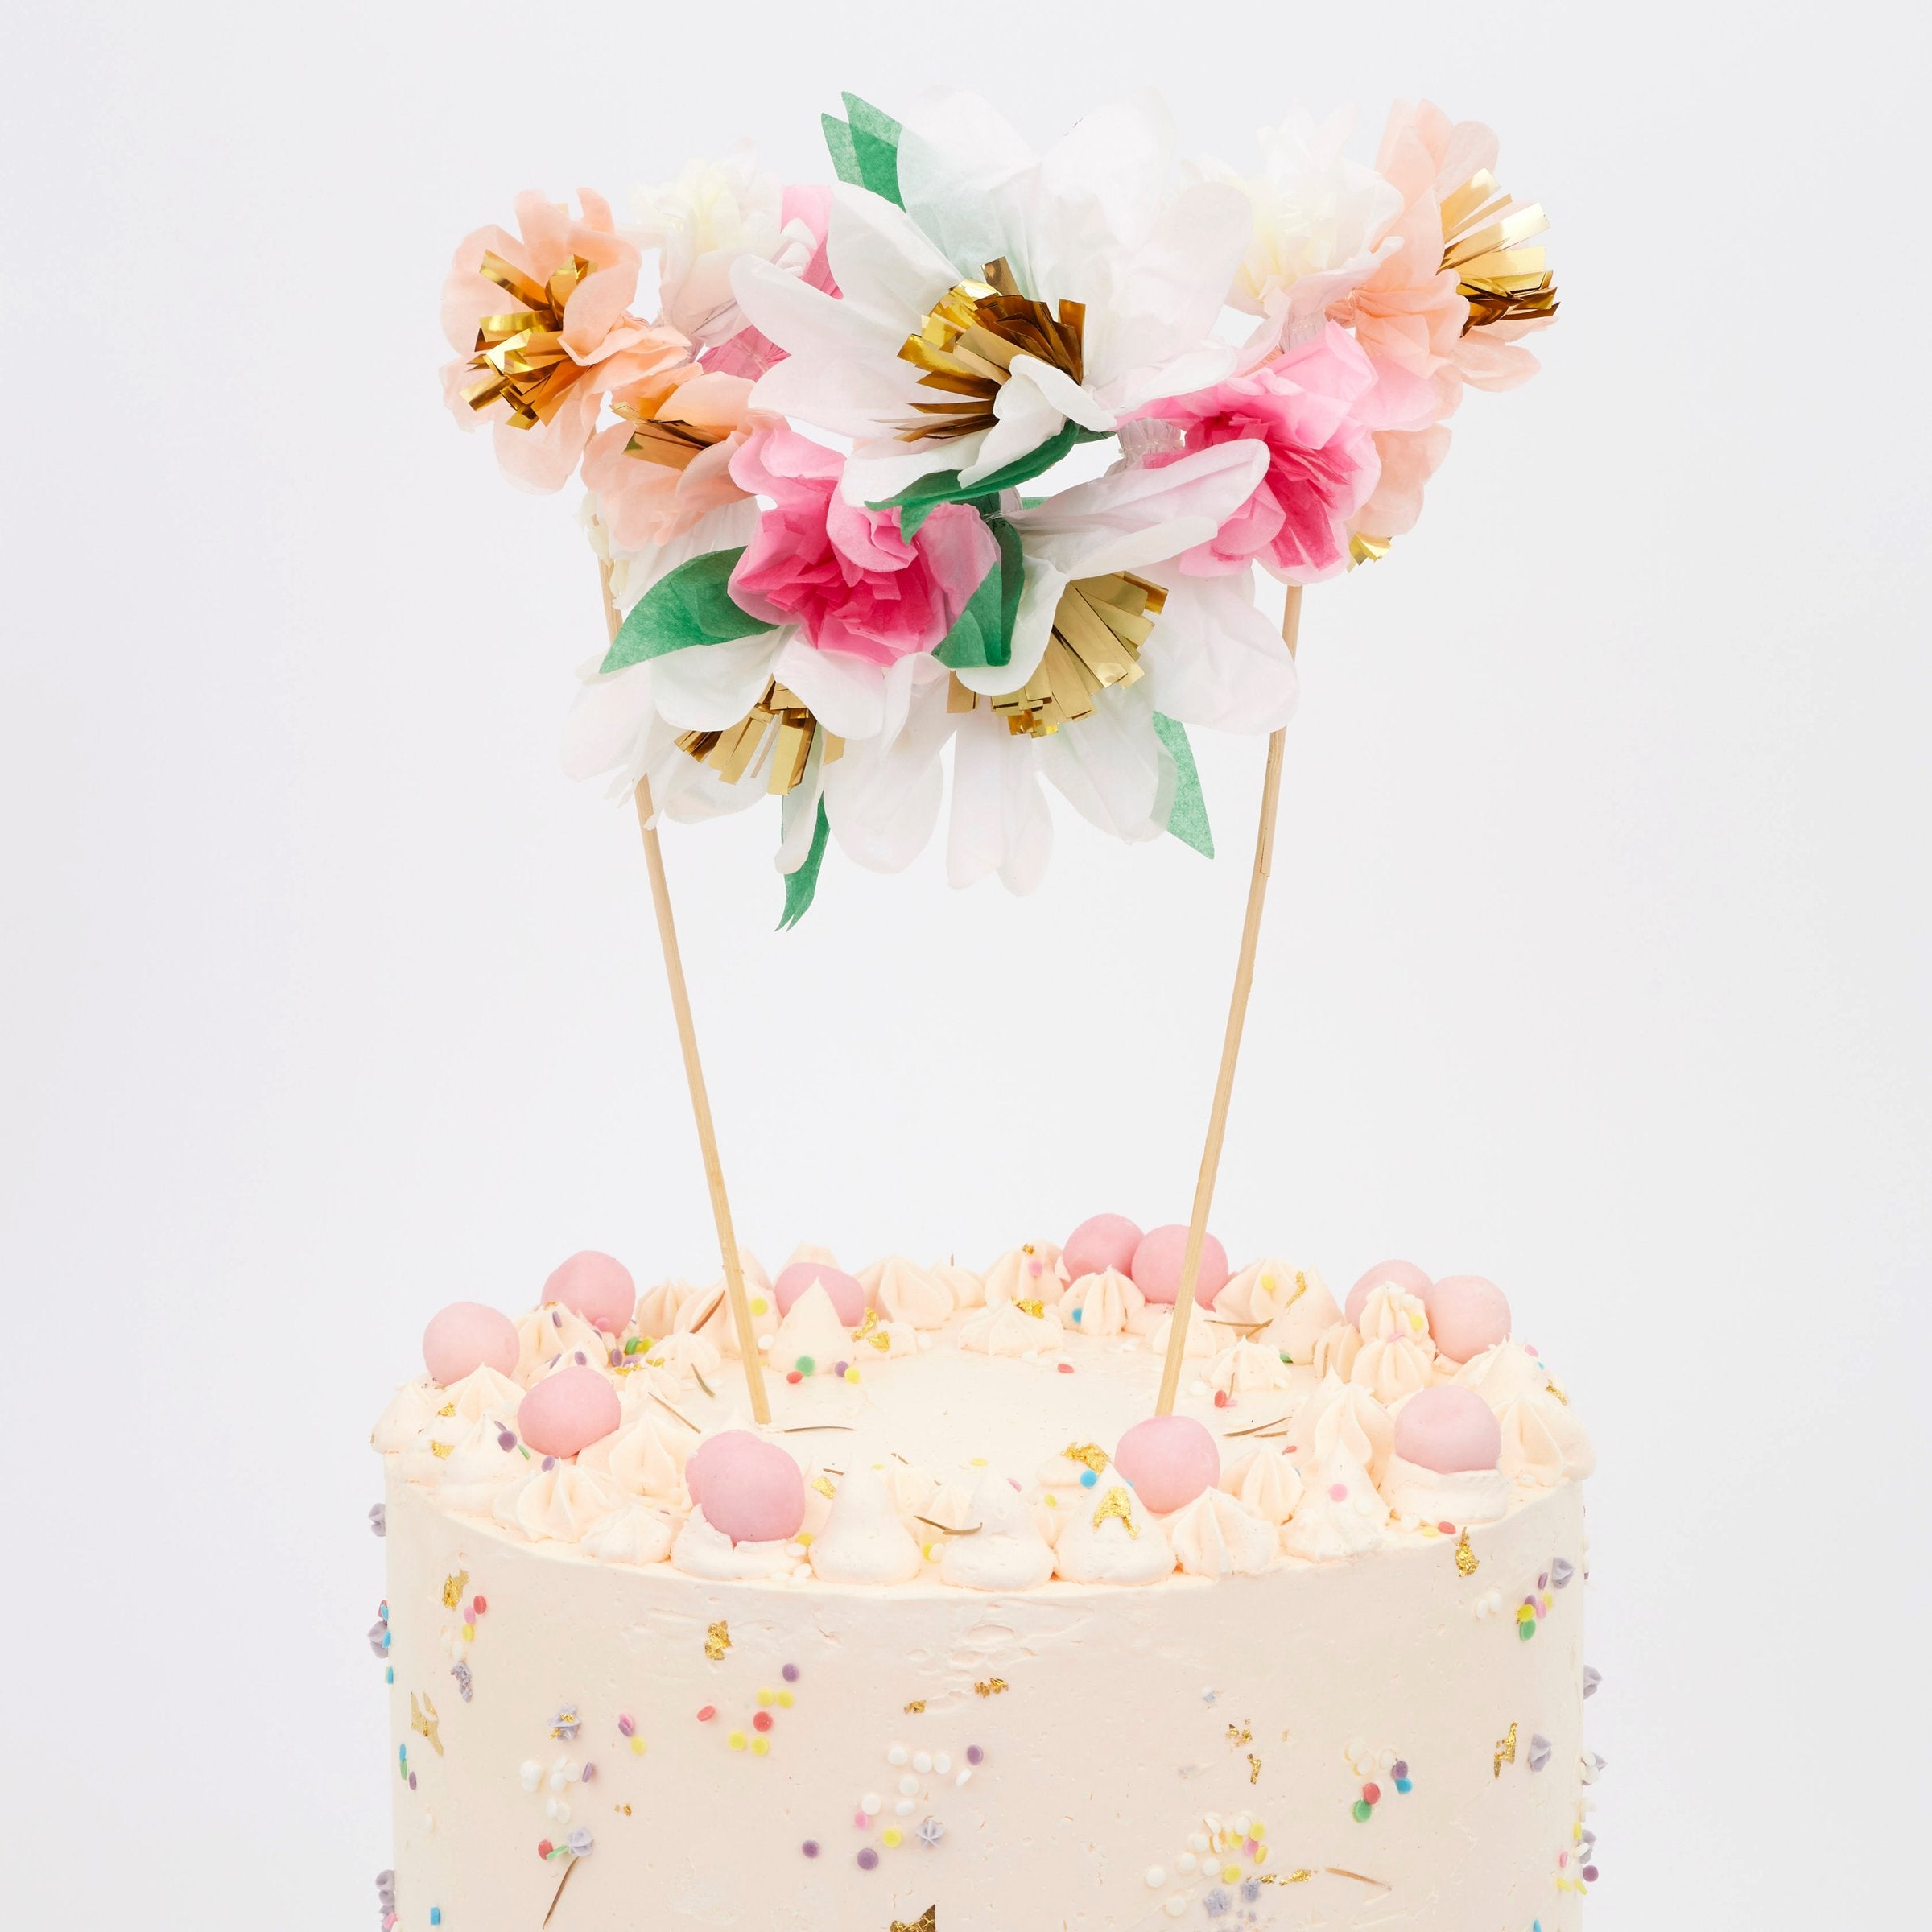 Turn a celebratory cake into a beautiful floral work of art with our fabulous cake topper crafted with colorful paper flowers.